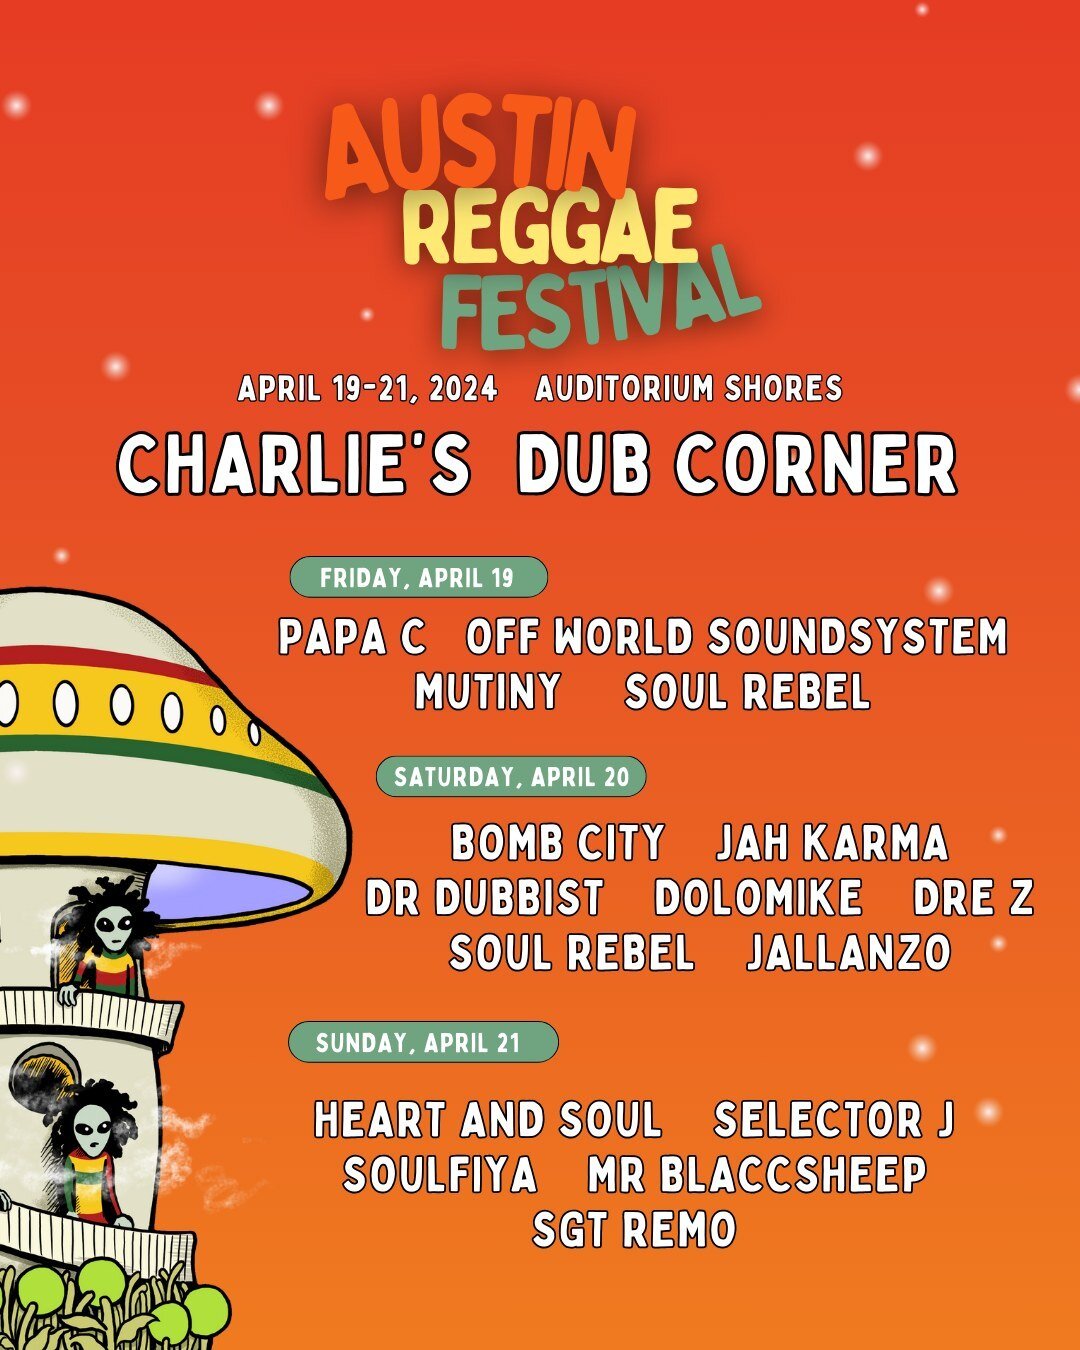 🌵Austin, are you ready to dub? 
Charlie's Dub Corner is bringing the vibes AGAIN this year at the Austin Reggae Festival! 

You can catch a bunch of Austin local dub favorites at Auditorium Shores from April 19-21. 

Grab your tickets now!